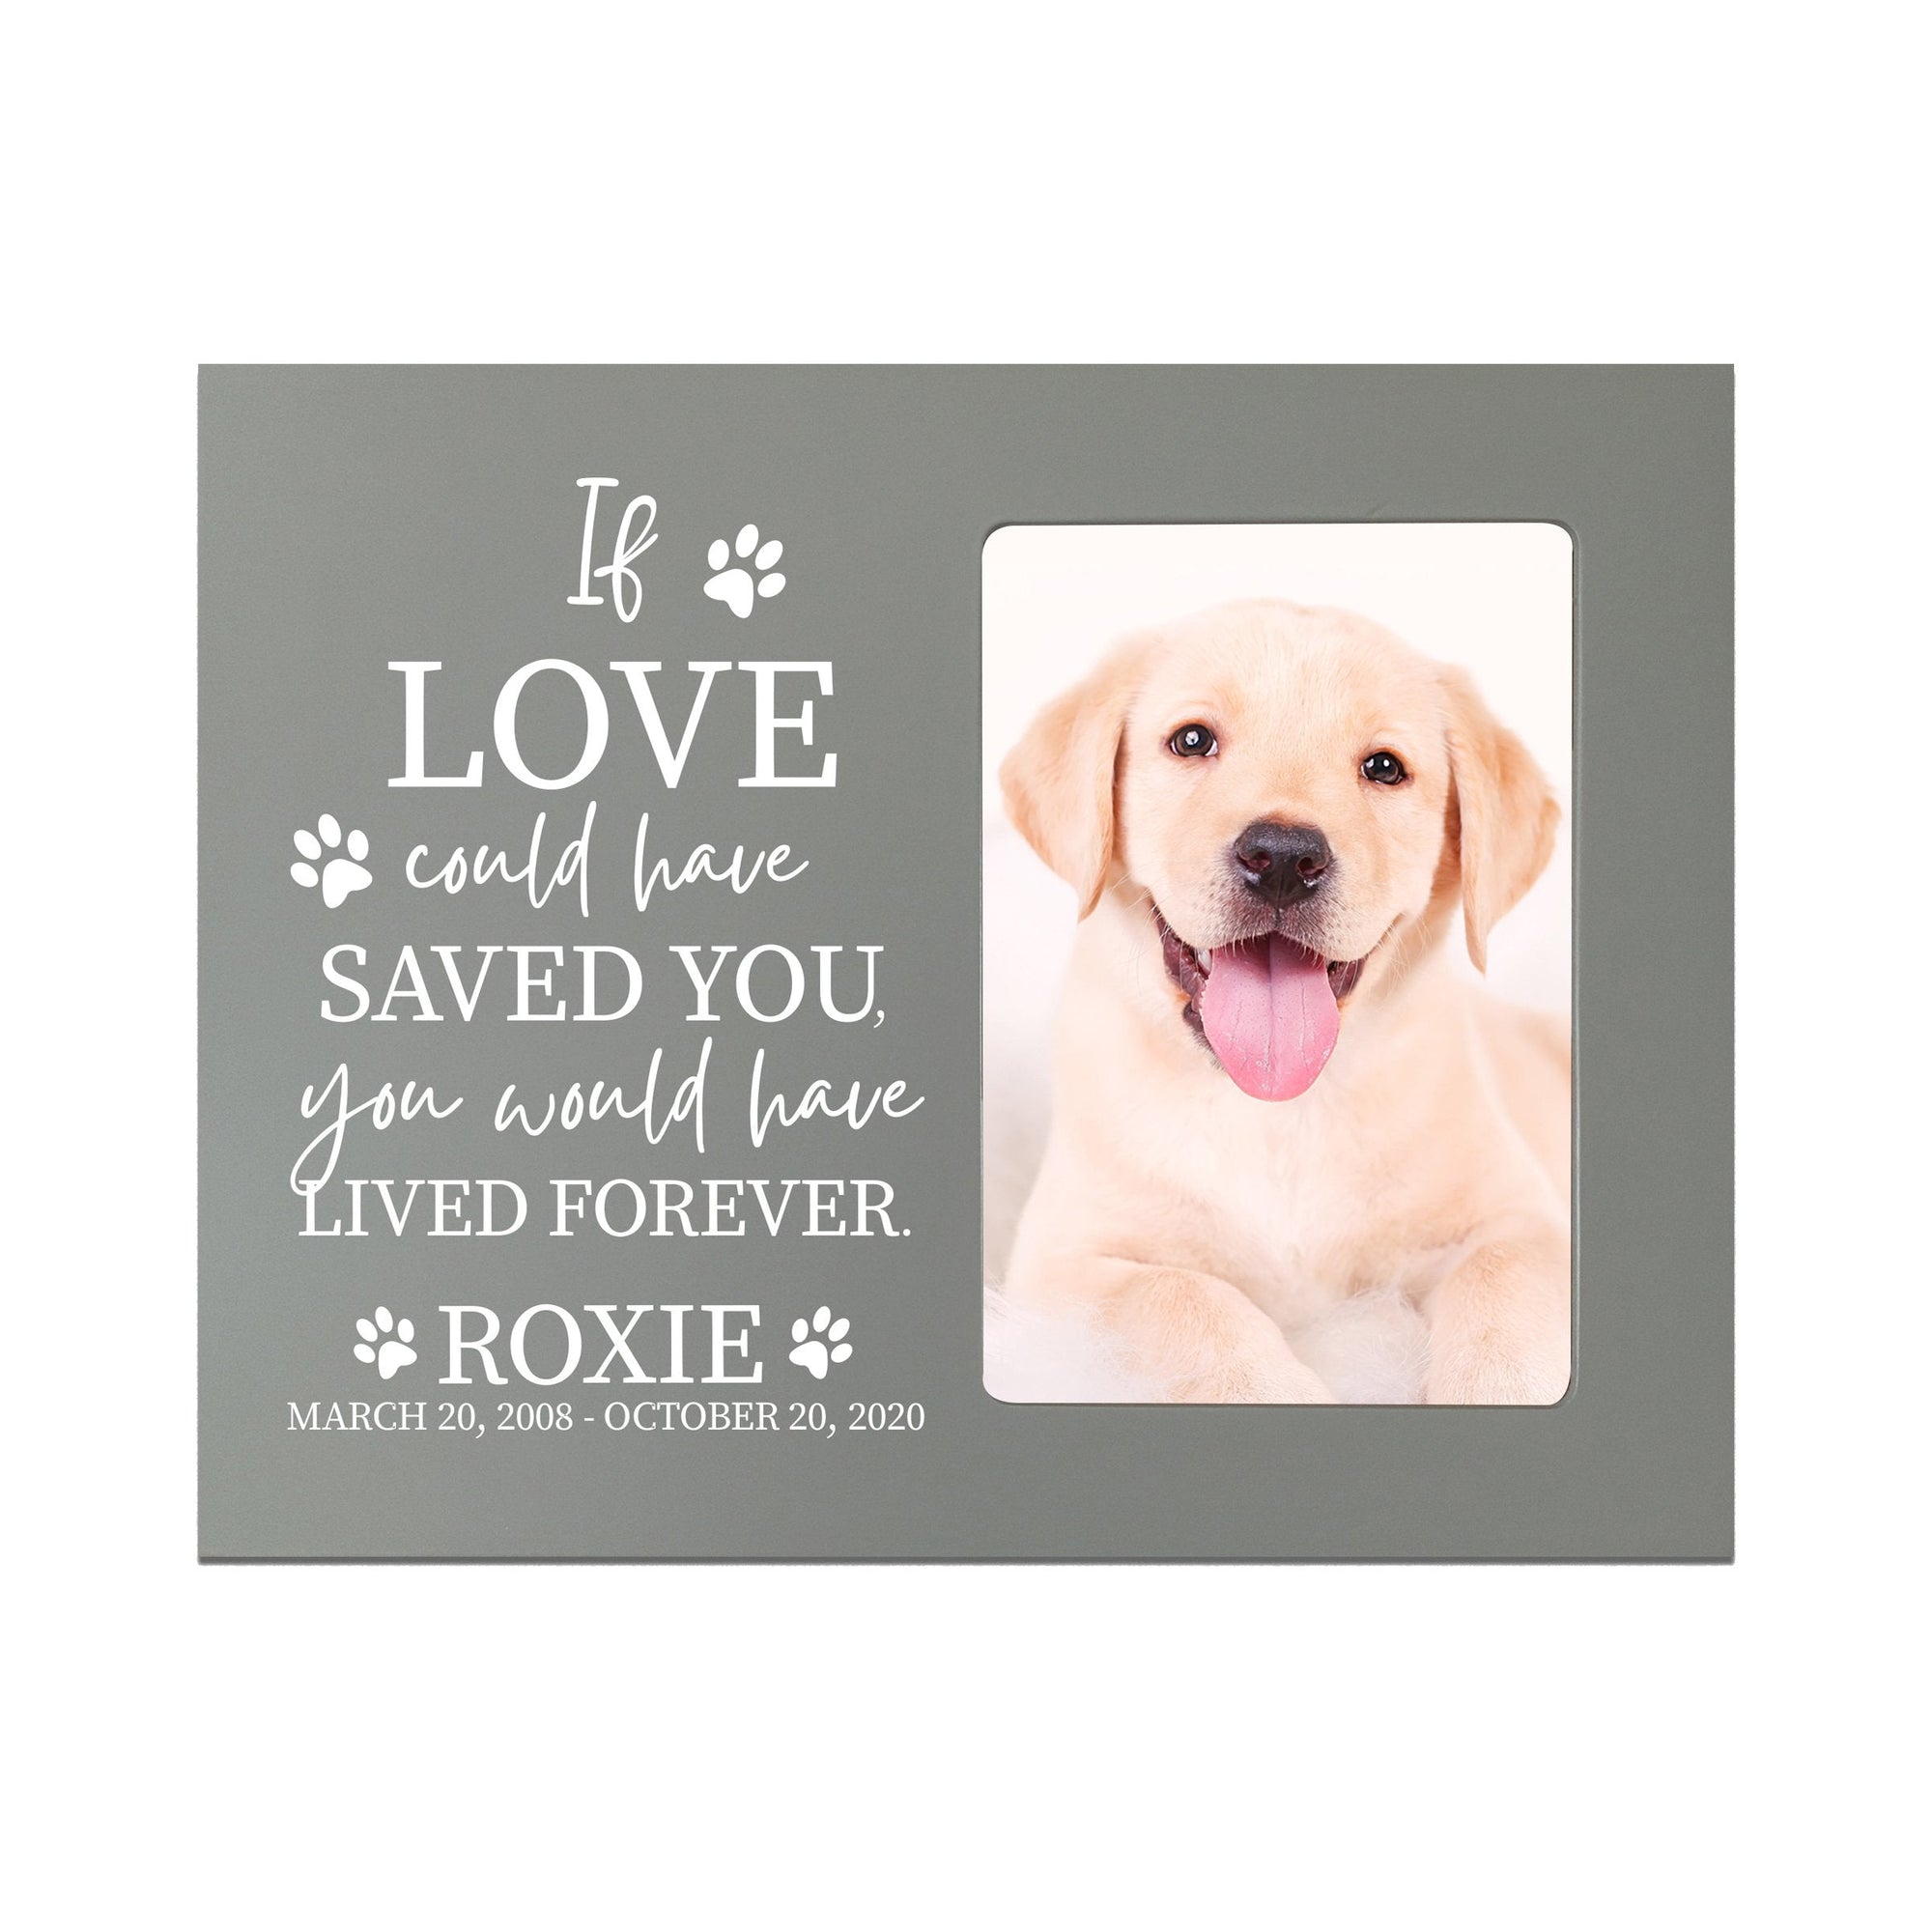 8x10 Grey Pet Memorial Picture Frame with the phrase "If Love Could Have Saved You"